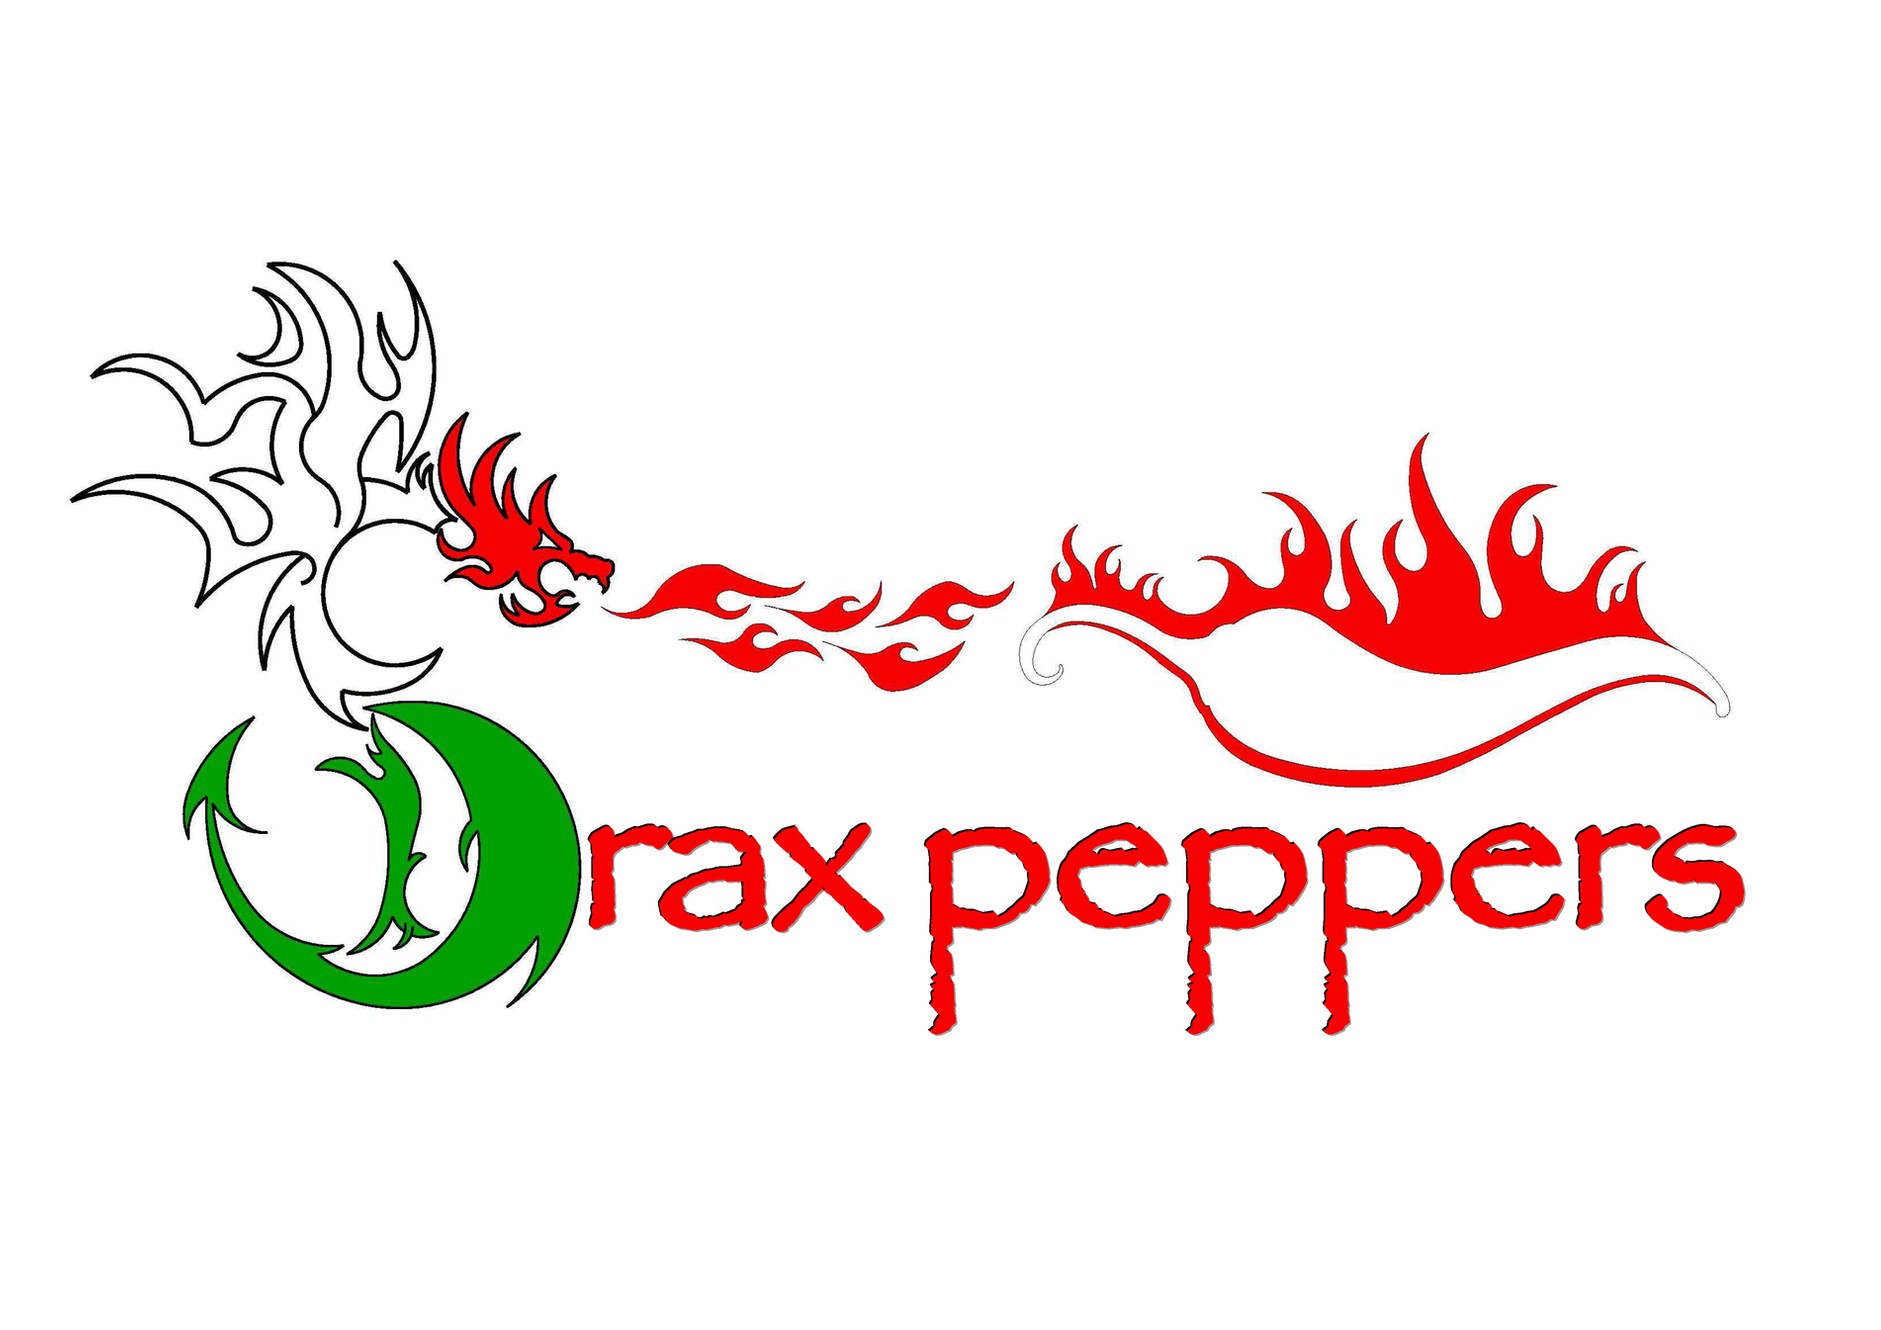 www.draxpeppers.com